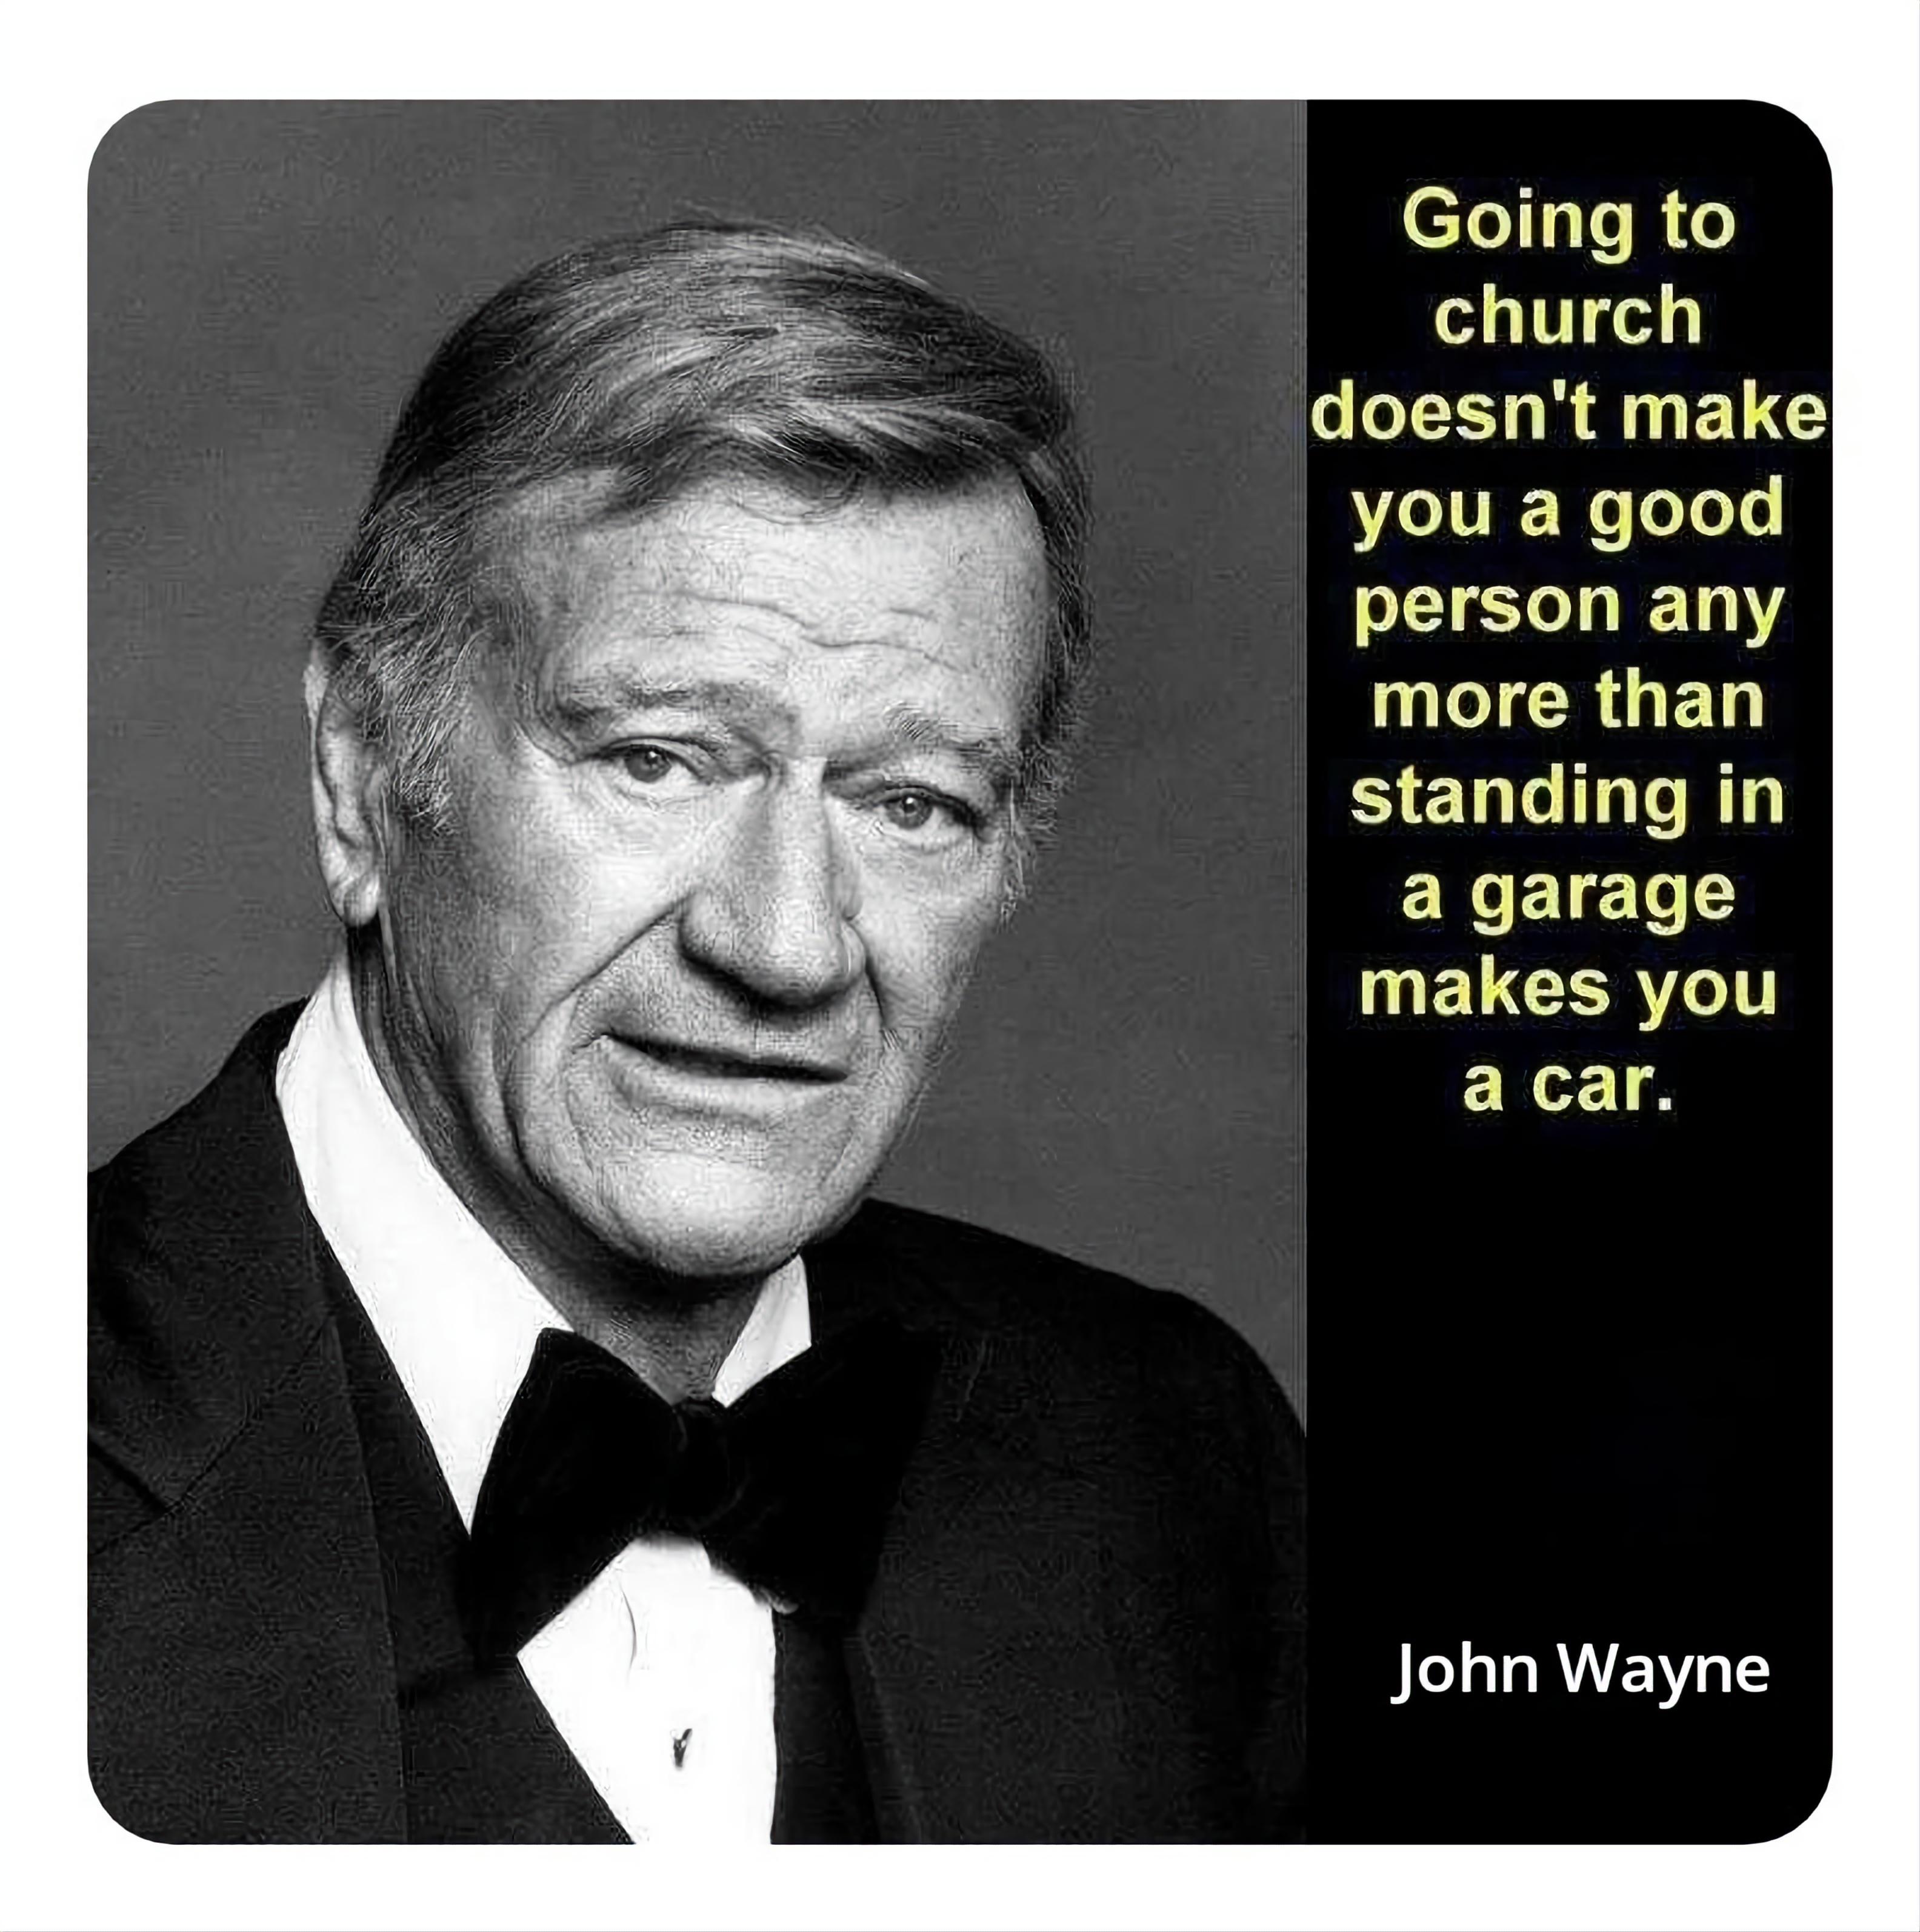 funny memes and pics  - john wayne older - Going to church doesn't make you a good person any more than standing in a garage makes you a car. John Wayne